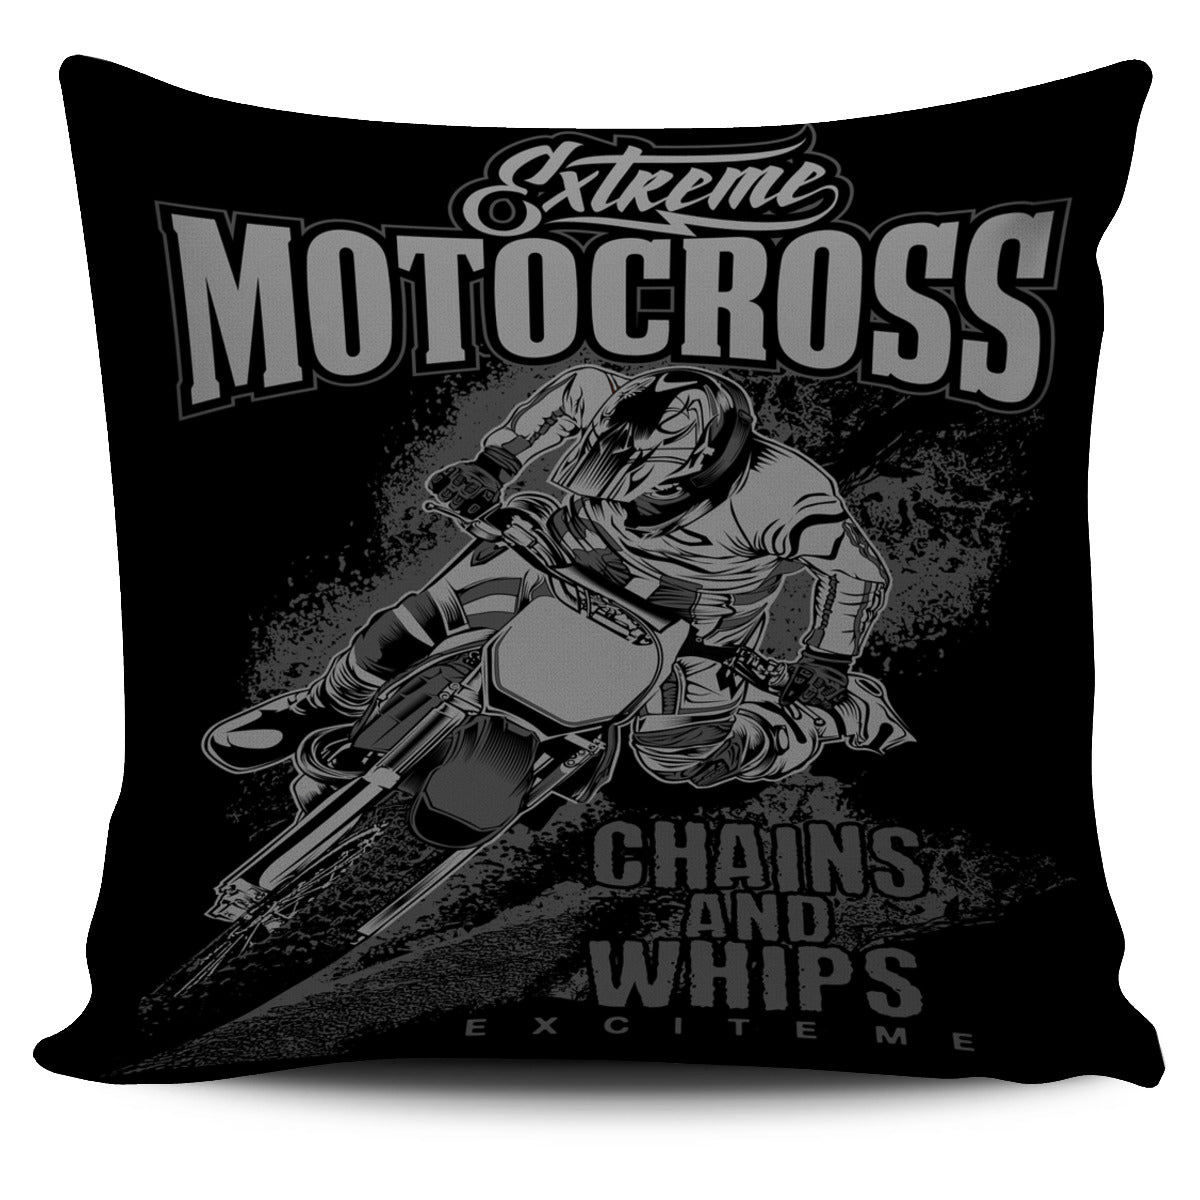 Chains And Whips Excite Me Motocross Pillow Cover